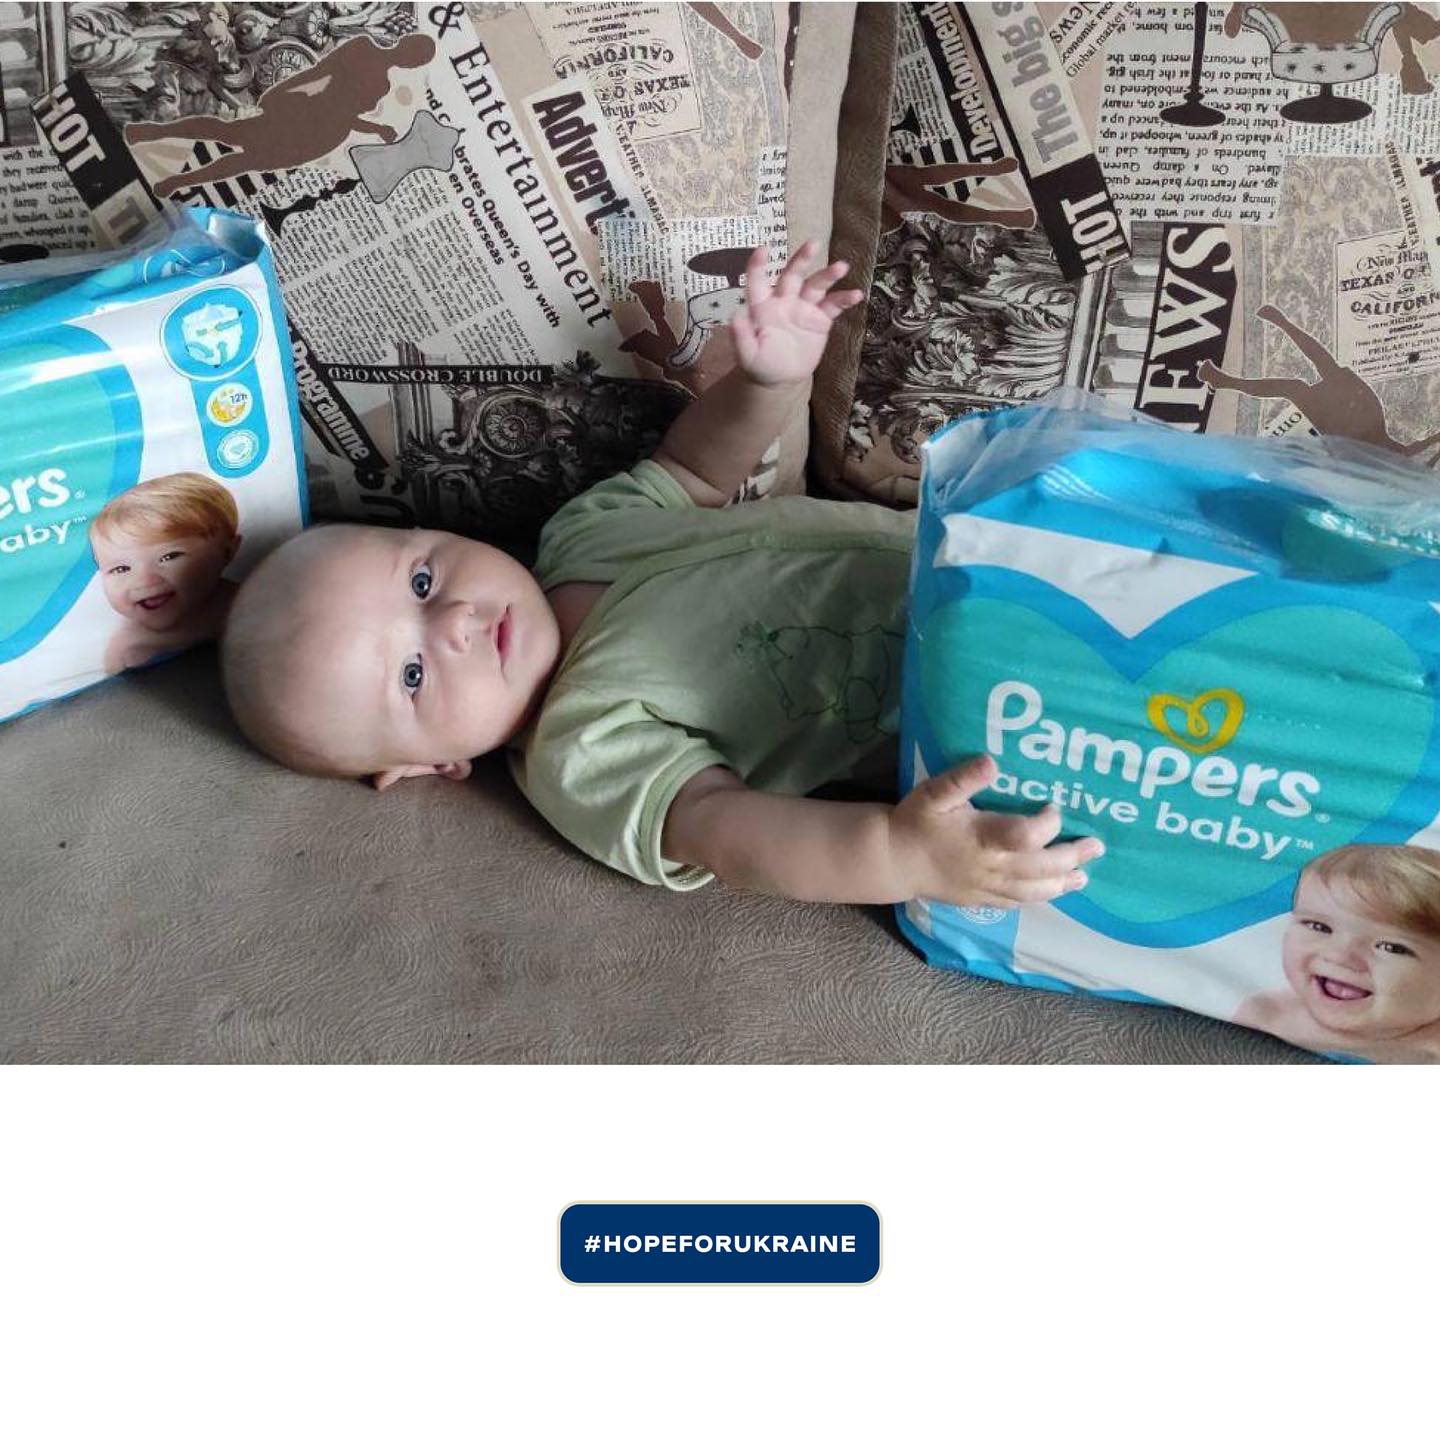 a baby is laying on a couch next to two packs of pampers diapers.